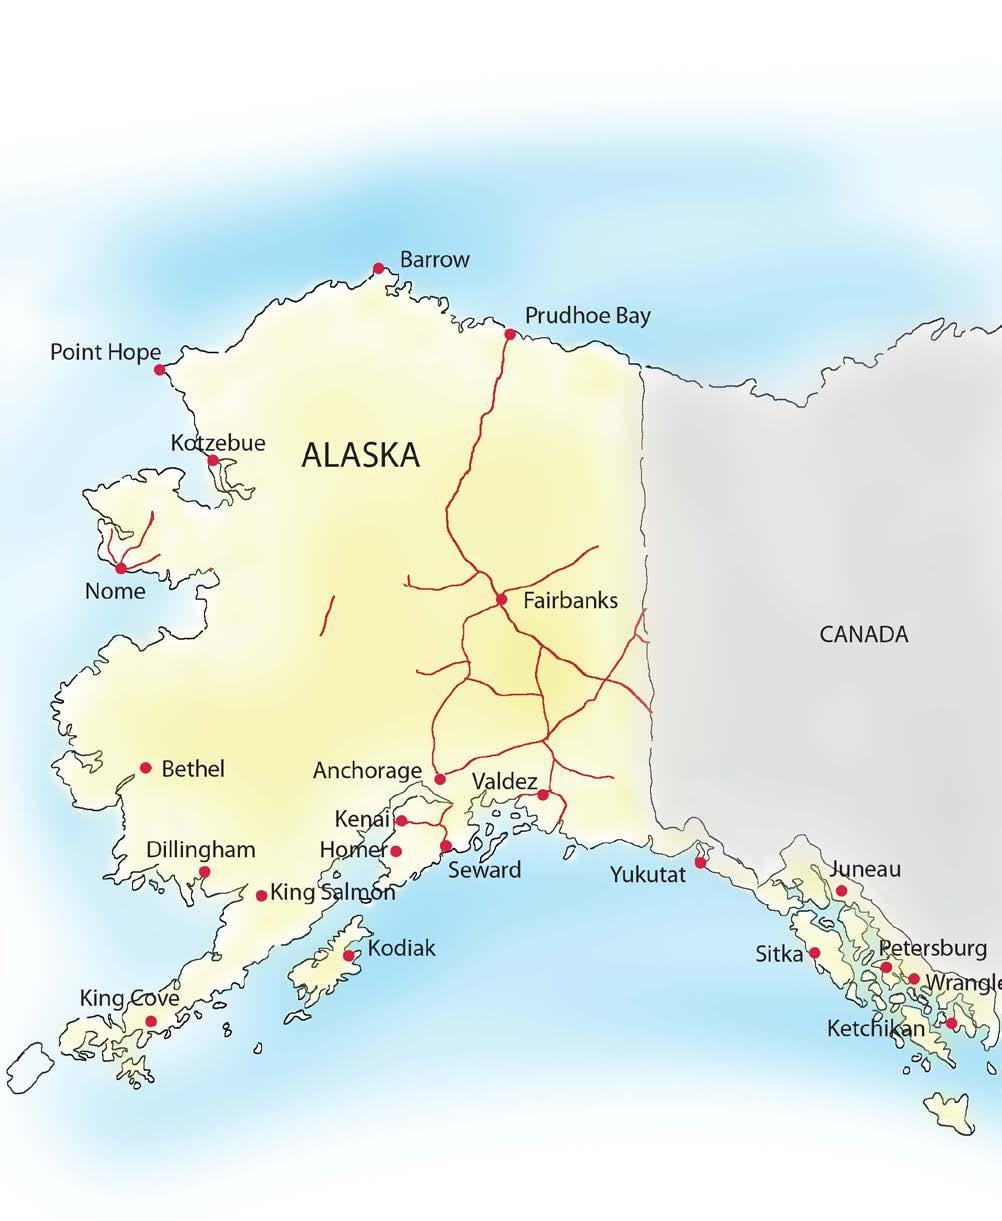 2 The lack of highways in Alaska means that most shipments go by air or sea. There is no railroad service from the Lower 48 states or from Canada to Alaska, so railcars must move on barges.